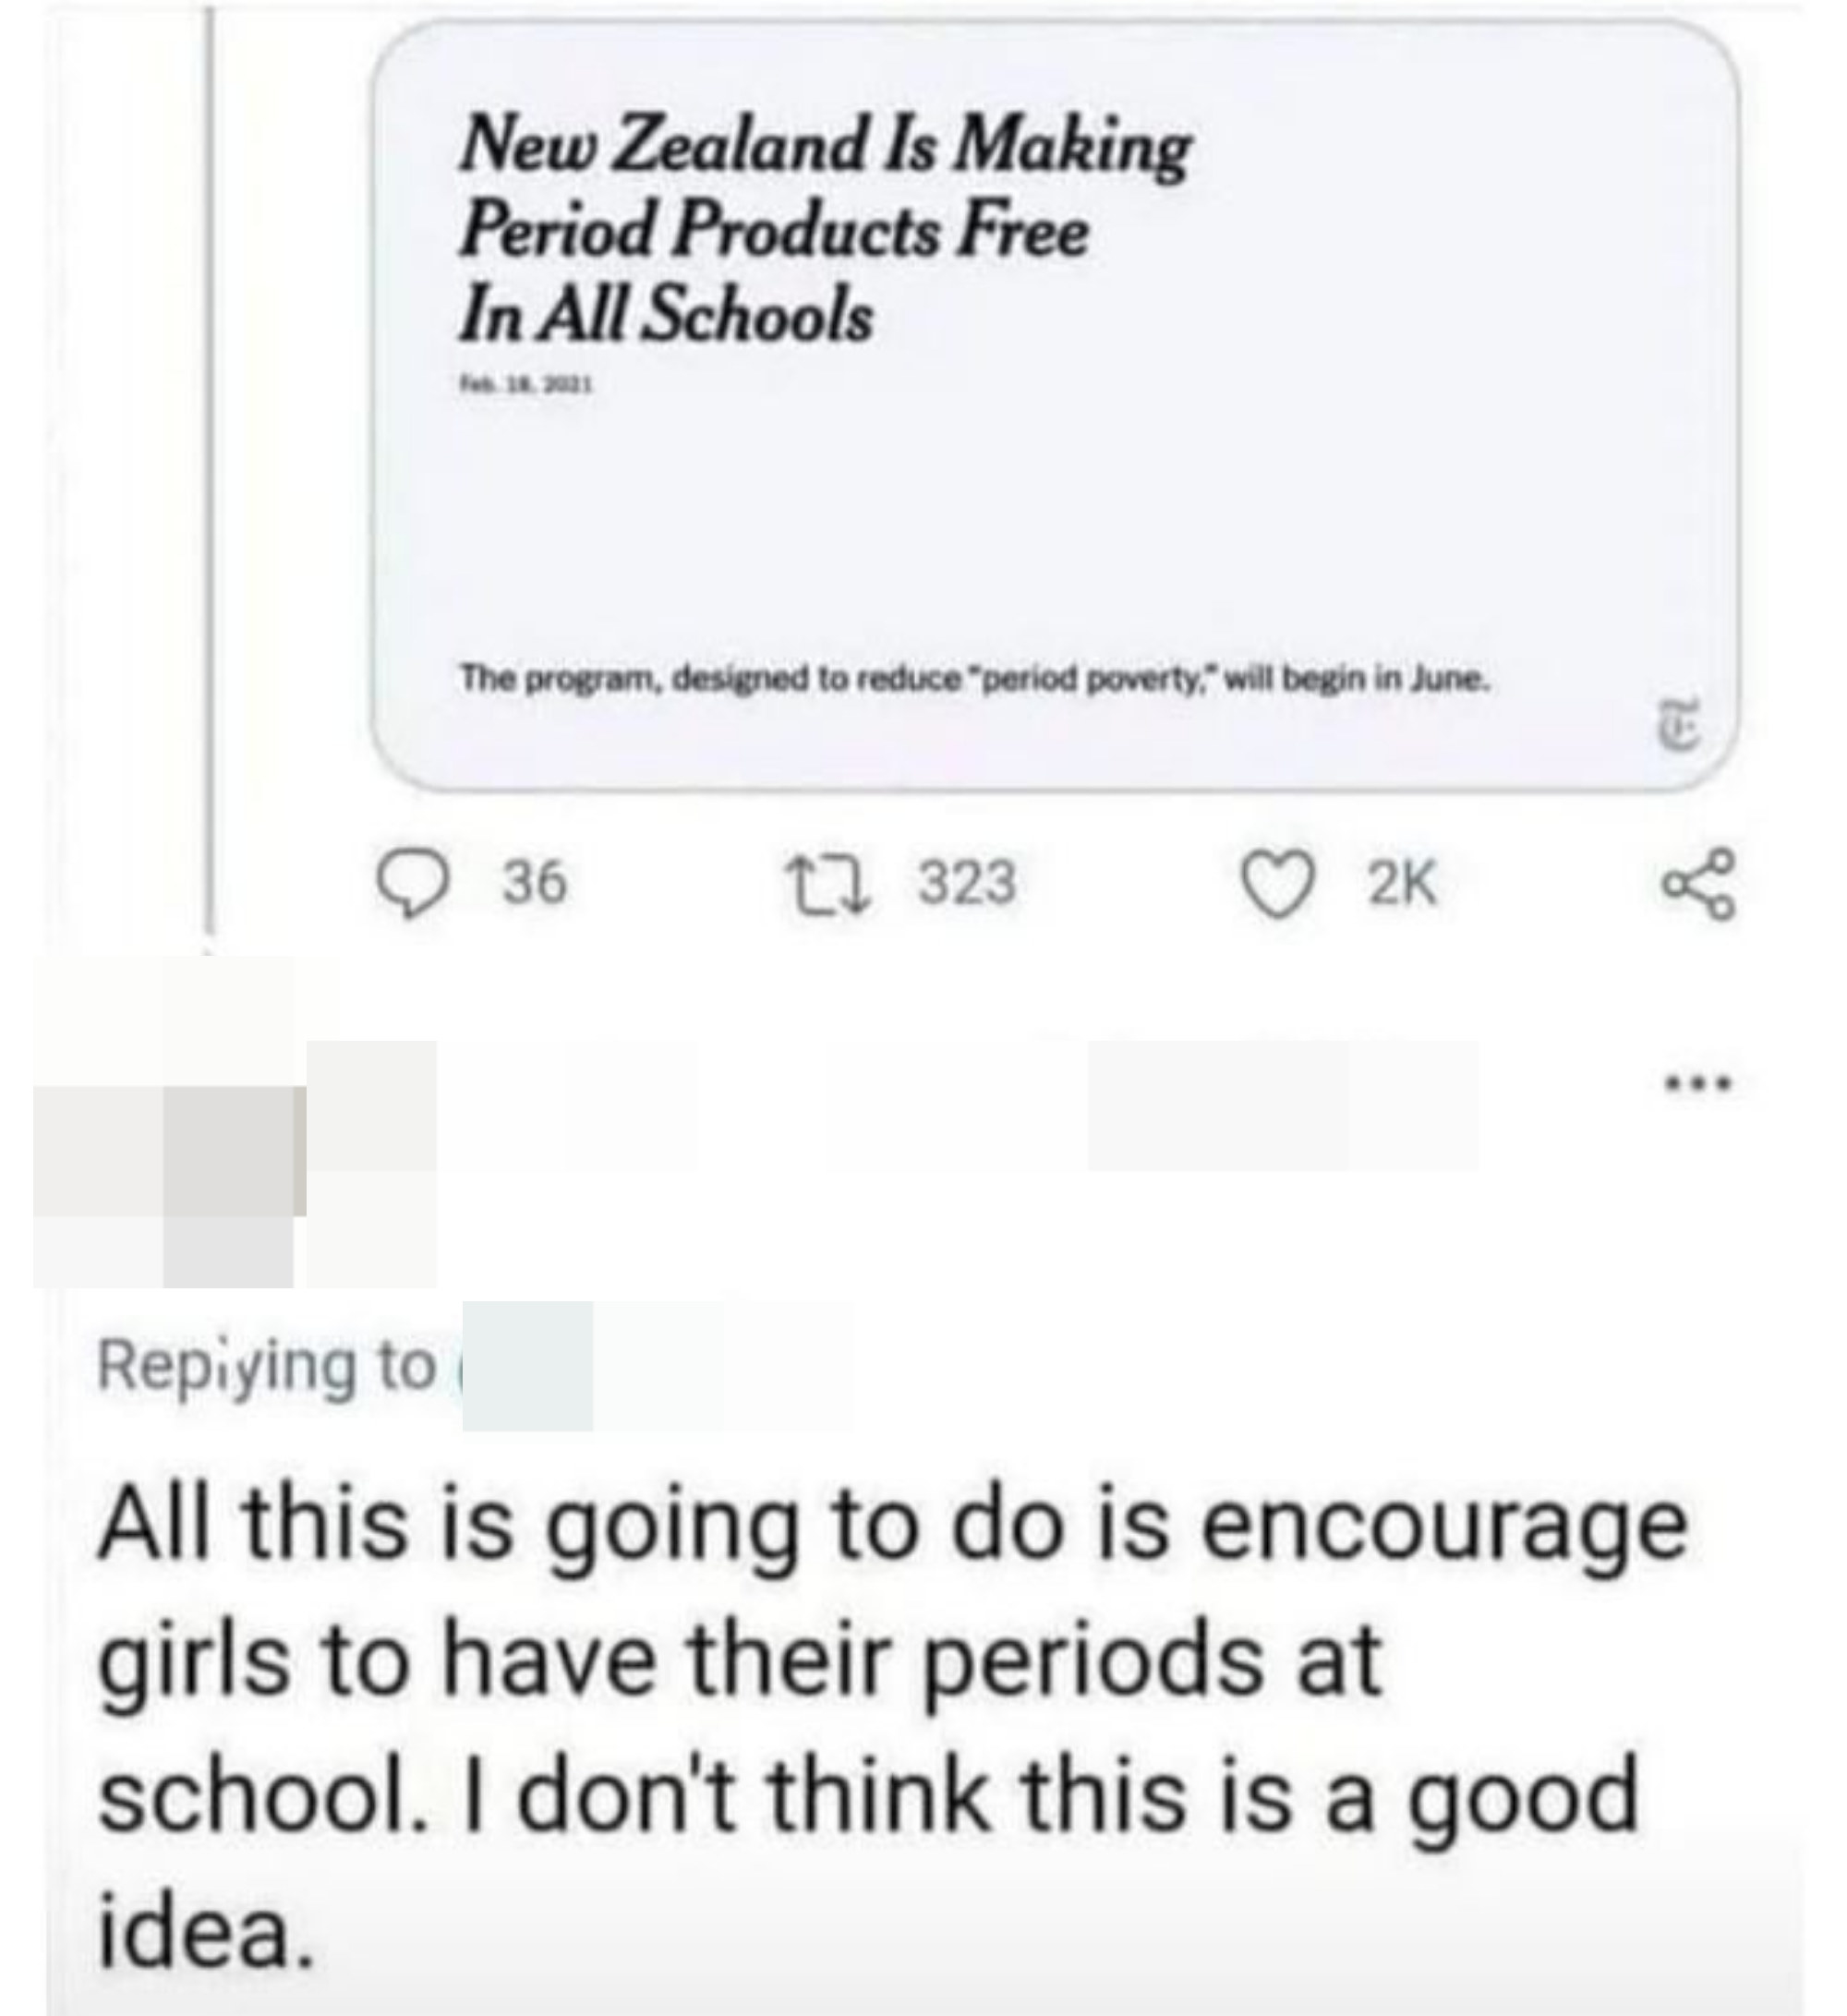 Headline: &quot;New Zealand Is Making Period Products Free in All Schools&quot;; response: &quot;All this is going to do is encourage girls to have their periods at school&quot;